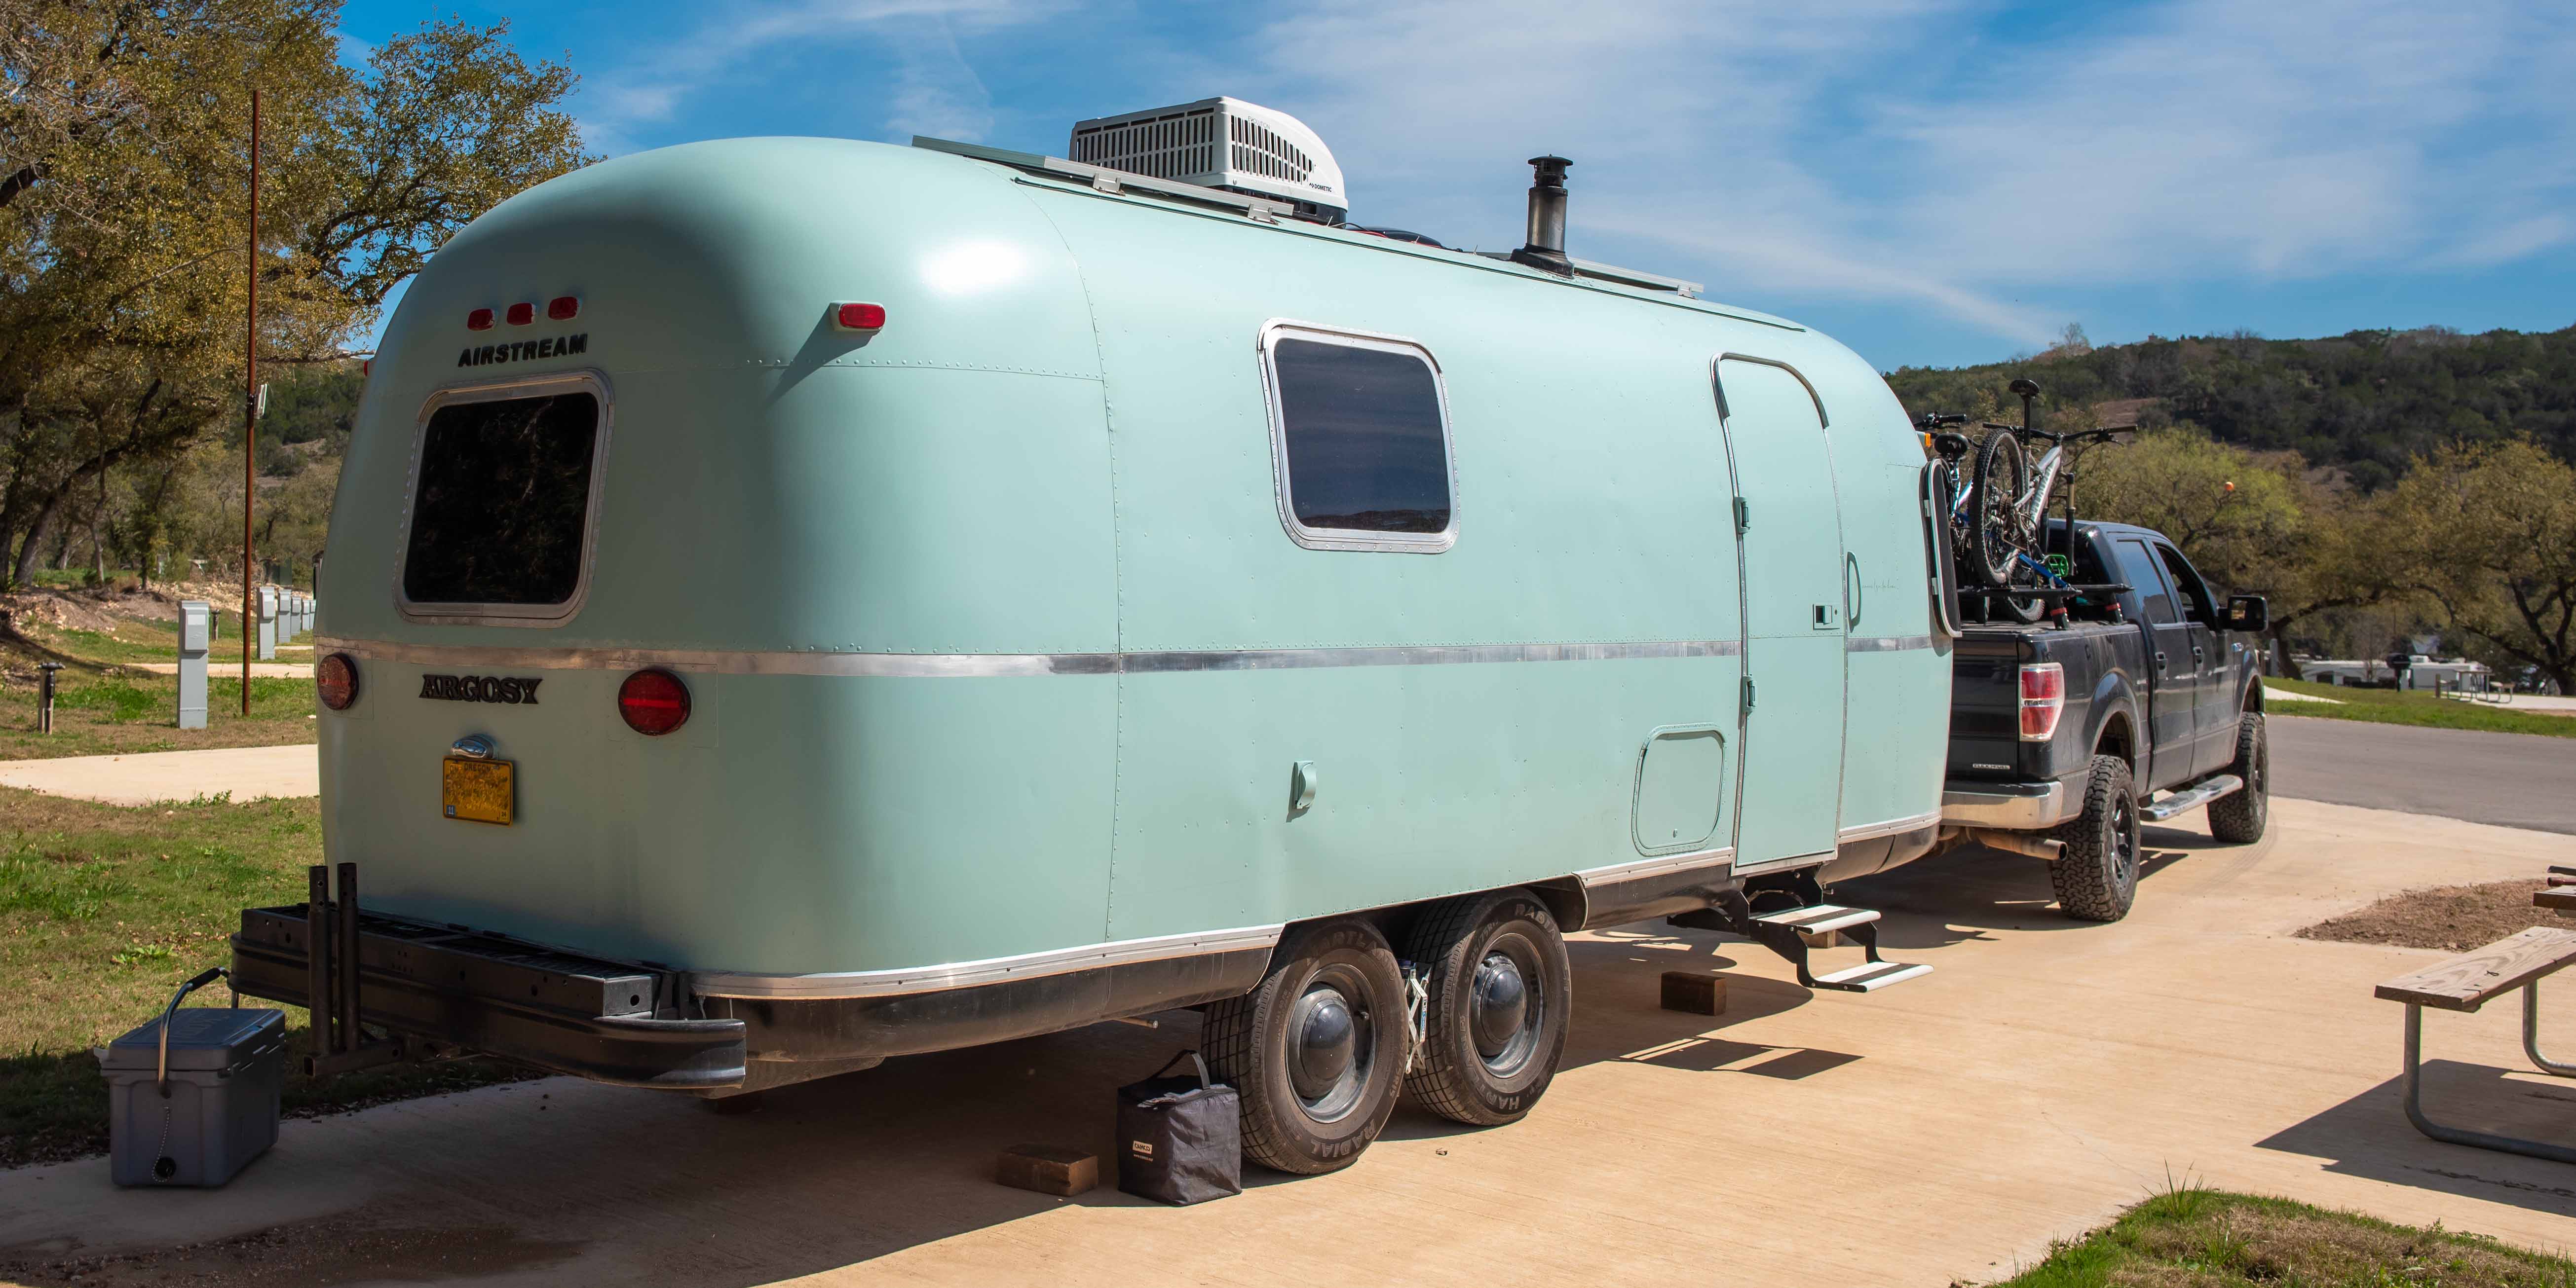 A vintage trailer in an RV site at Camp Fimfo